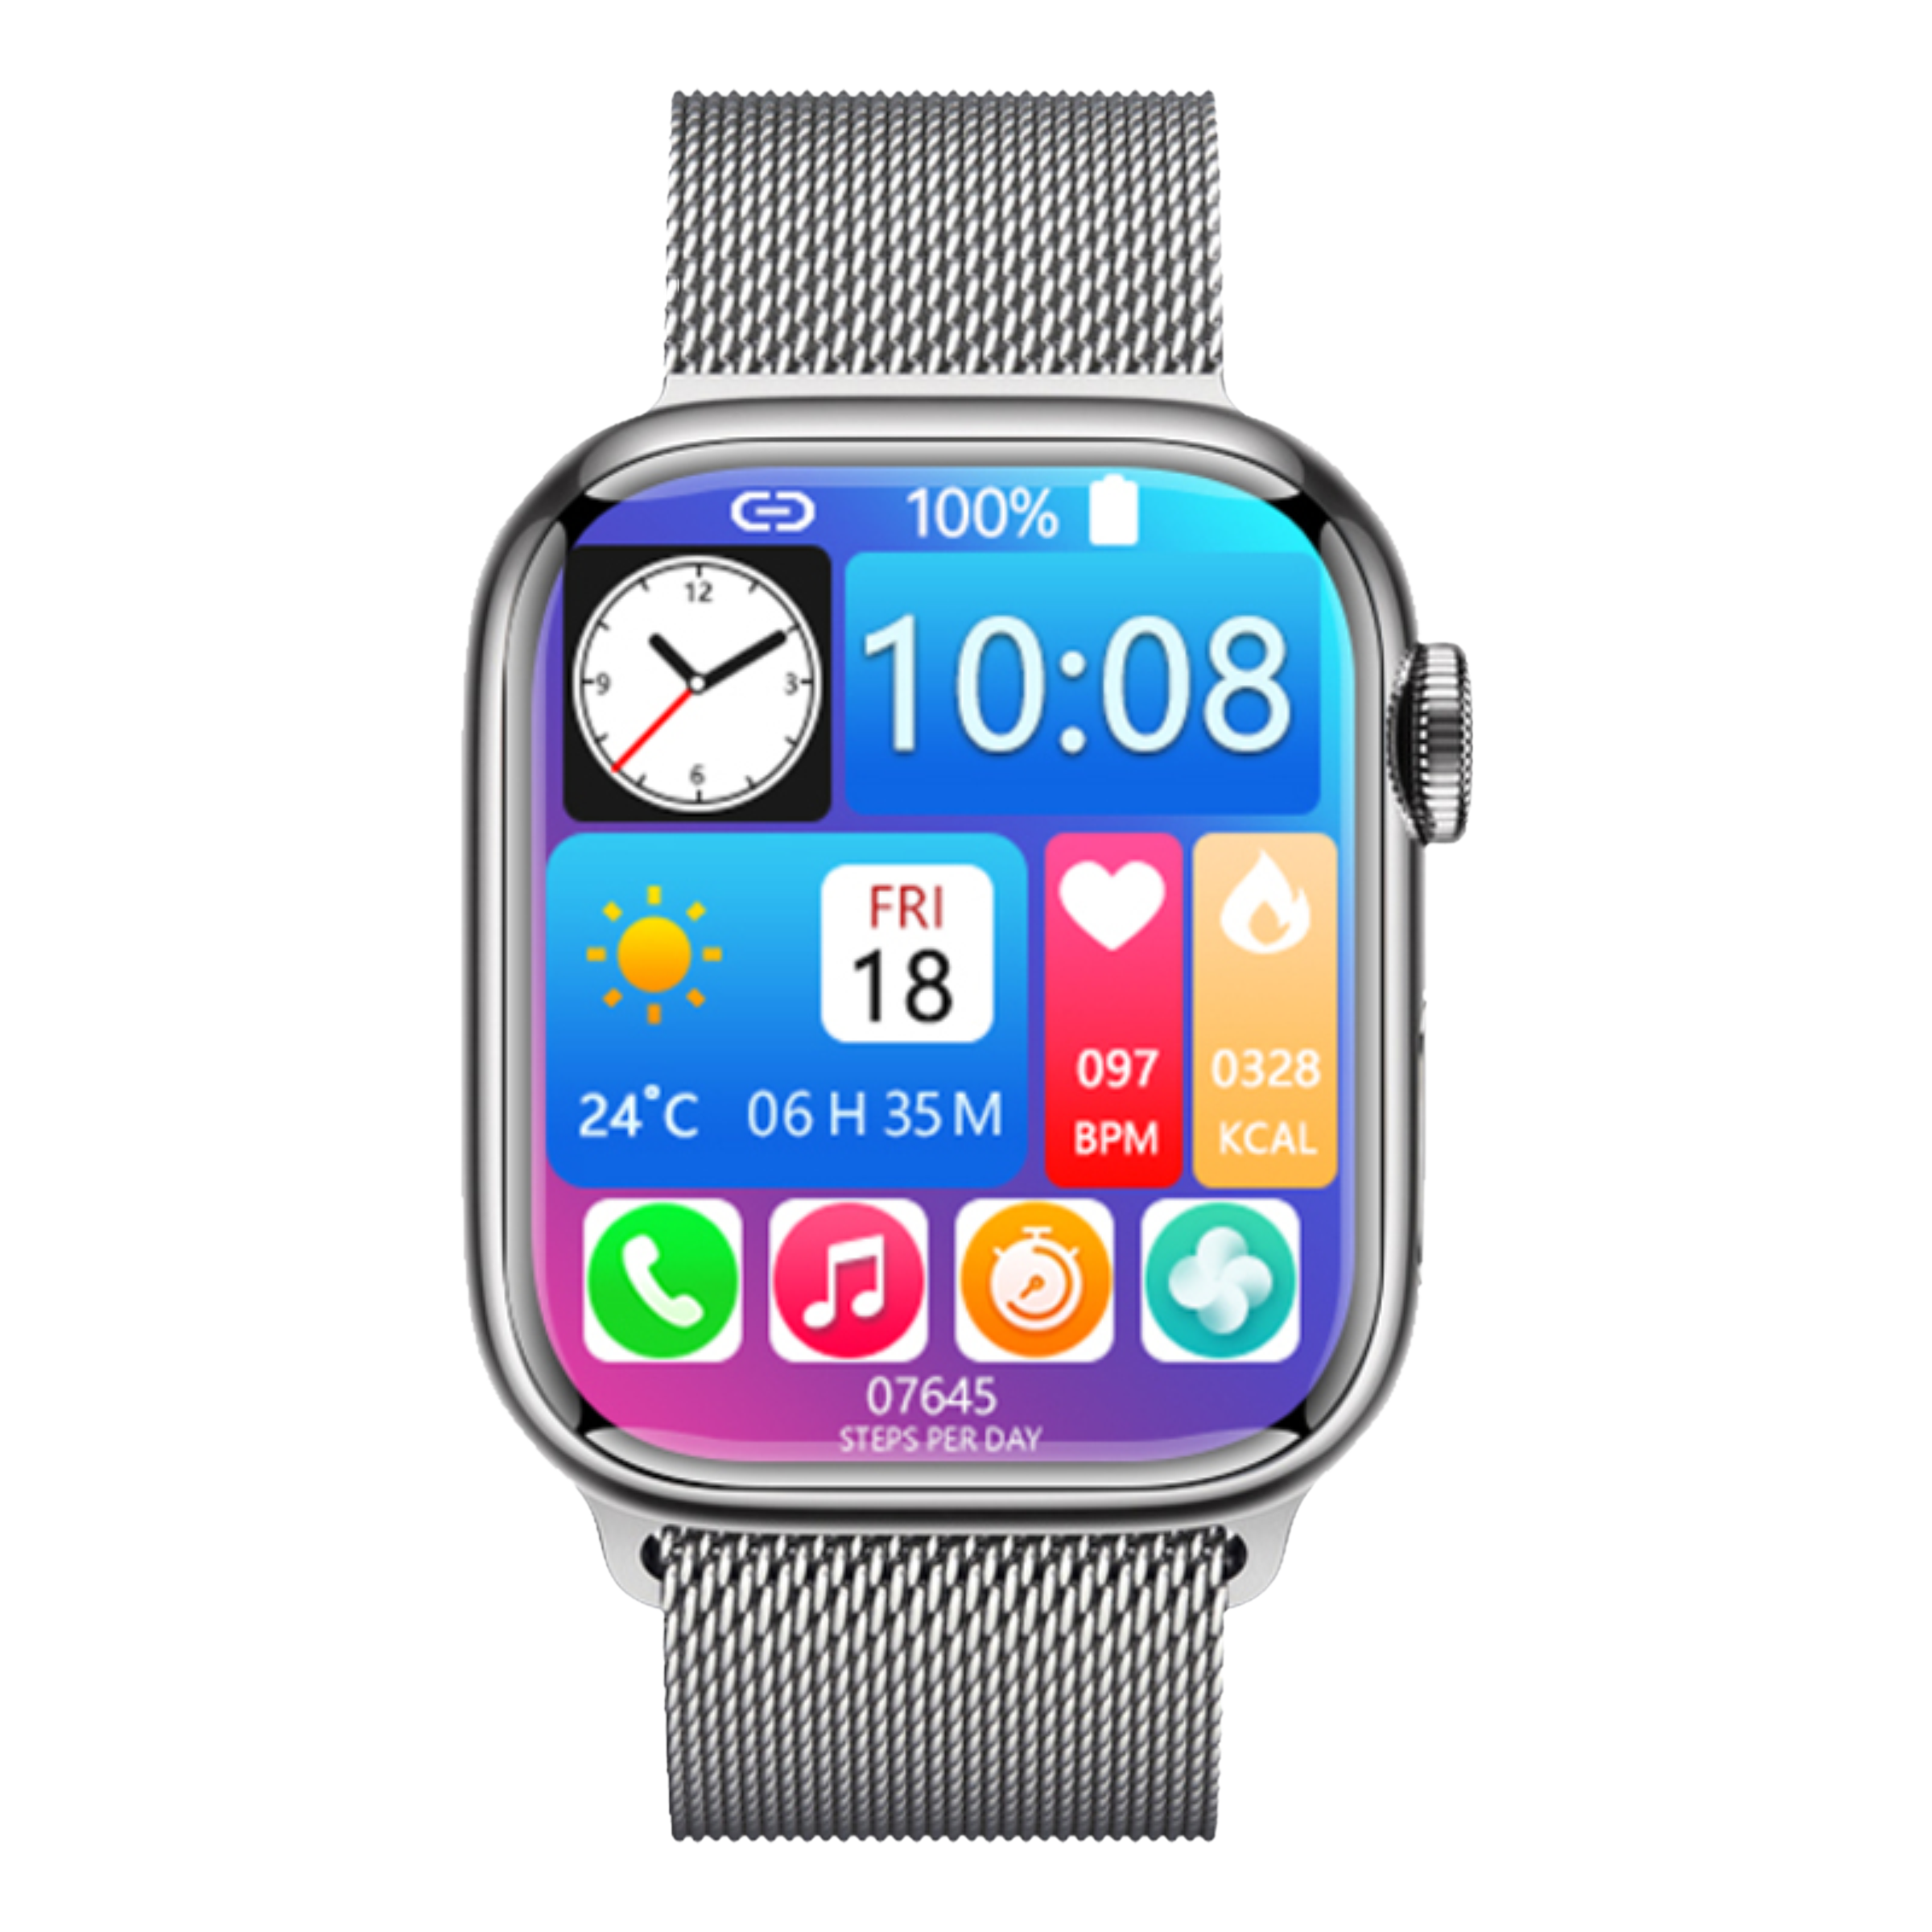 I KALL W4 Smartwatch with Bluetooth Calling (43.68mm HD Display, IP68 Water Resistant, Silver Strap)_1